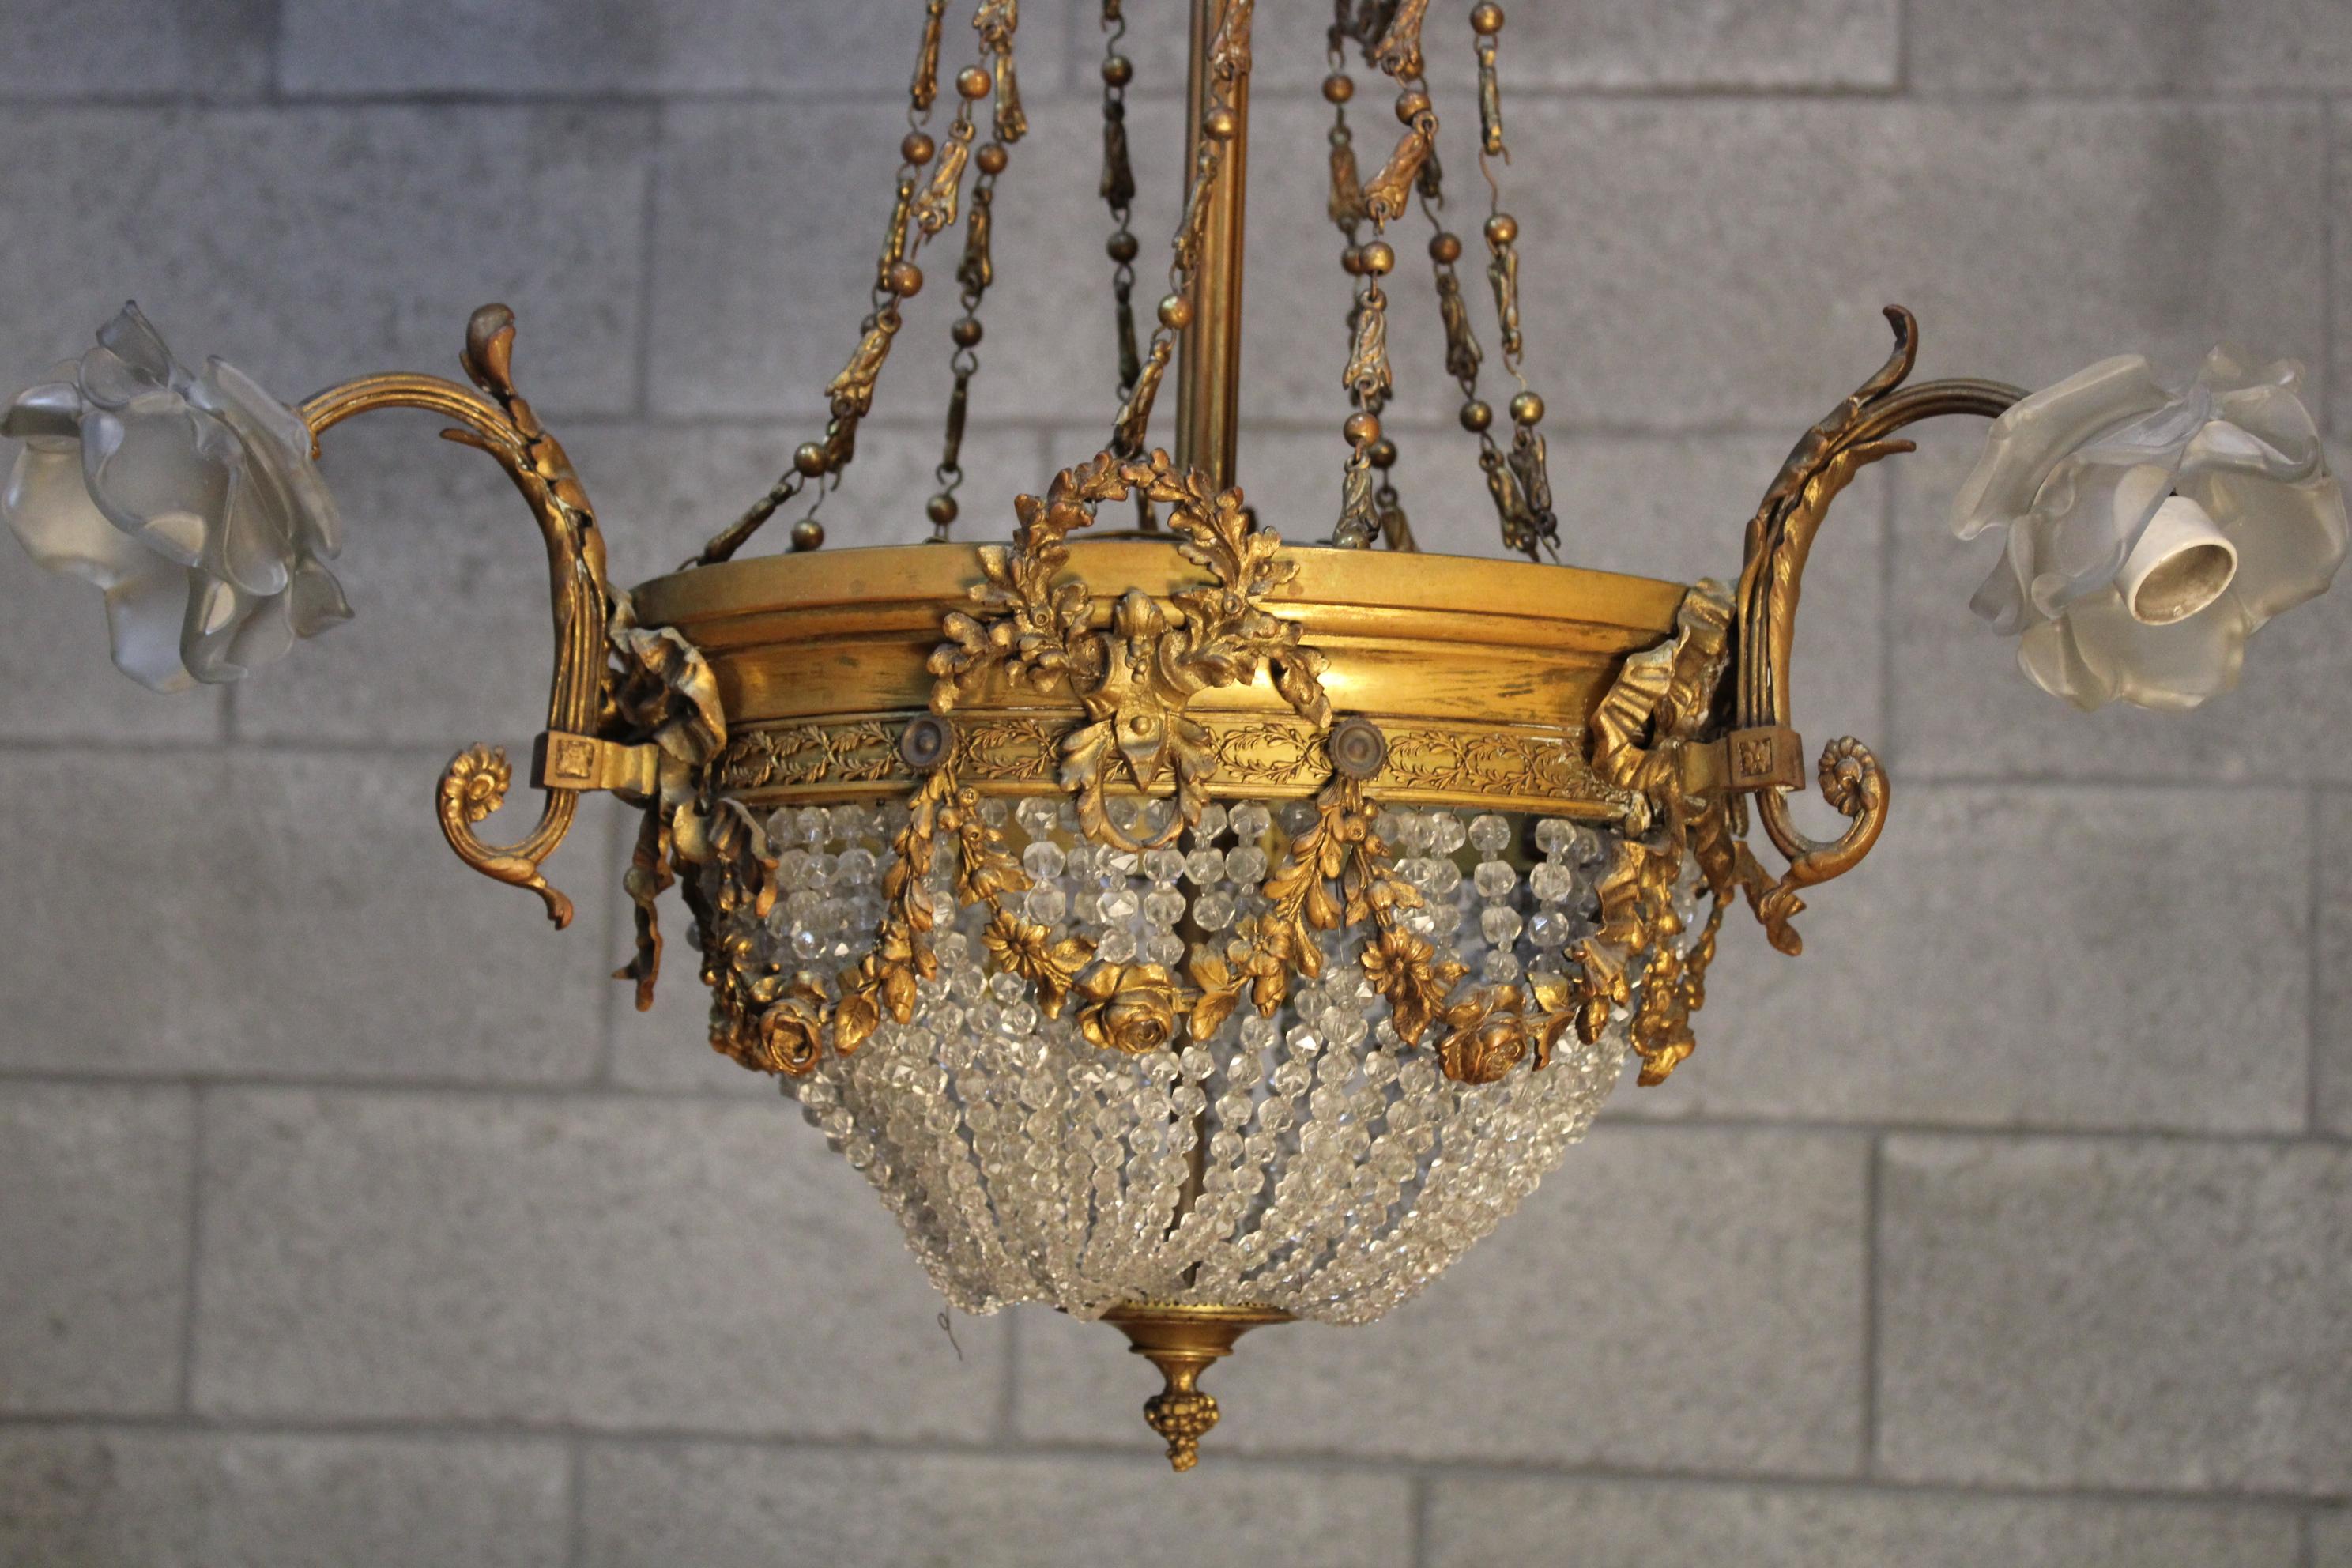 Louis XVI Style Crystal and gilt bronze chandelier from end of 19th century - circa 1860-1870 France... richly gilded and carved bronze, surrounded with crystals and 3 lights... particular piece 
Will be shipped inside a wood secured crate or will